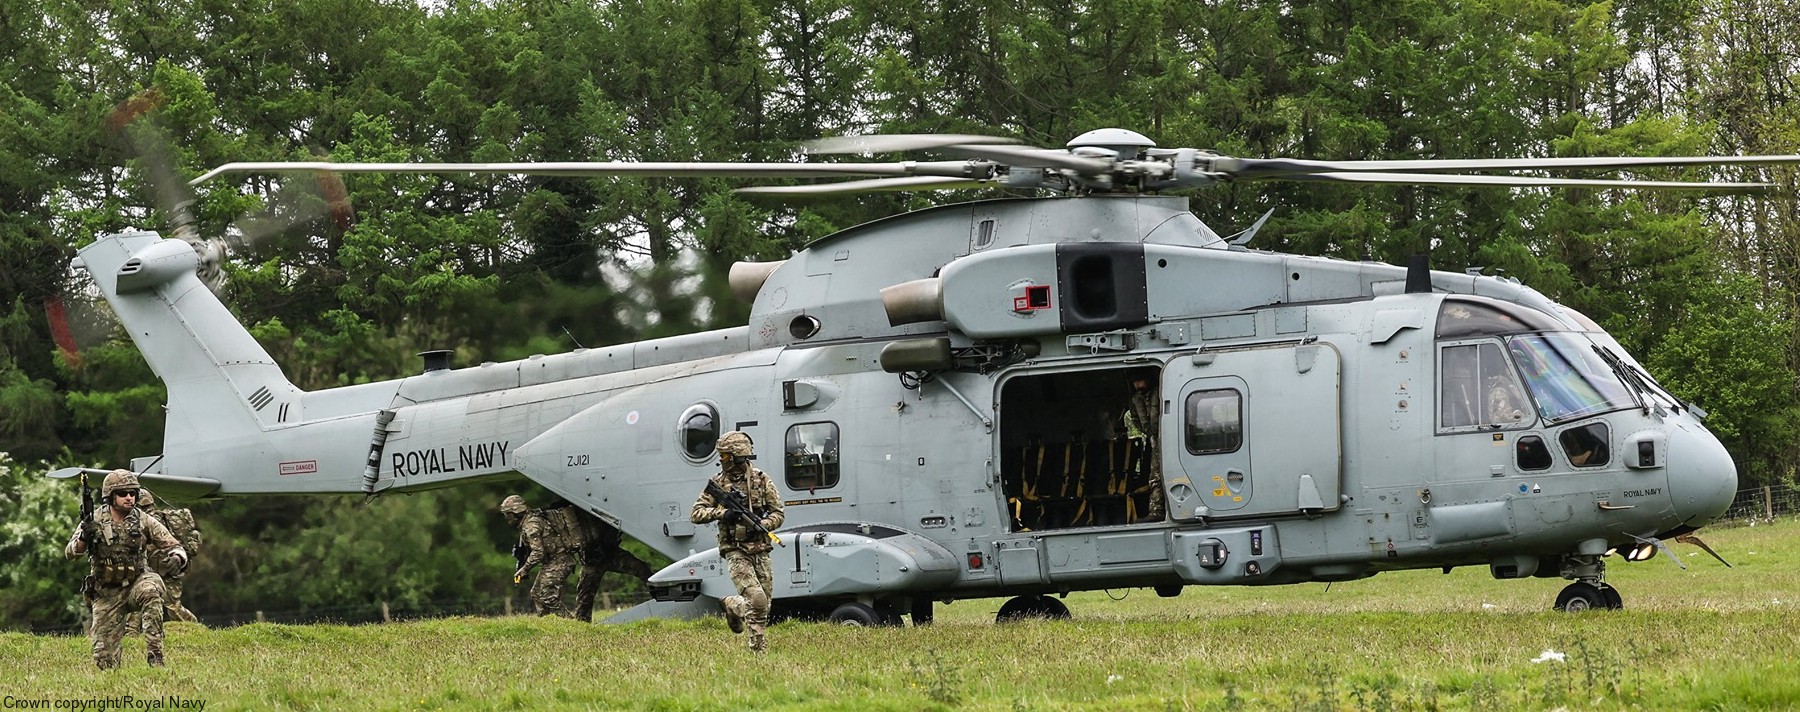 merlin hc4 mk.4 commando helicopter force chf royal navy 845 846 naval air squadron rnas yeovilton aw101 35